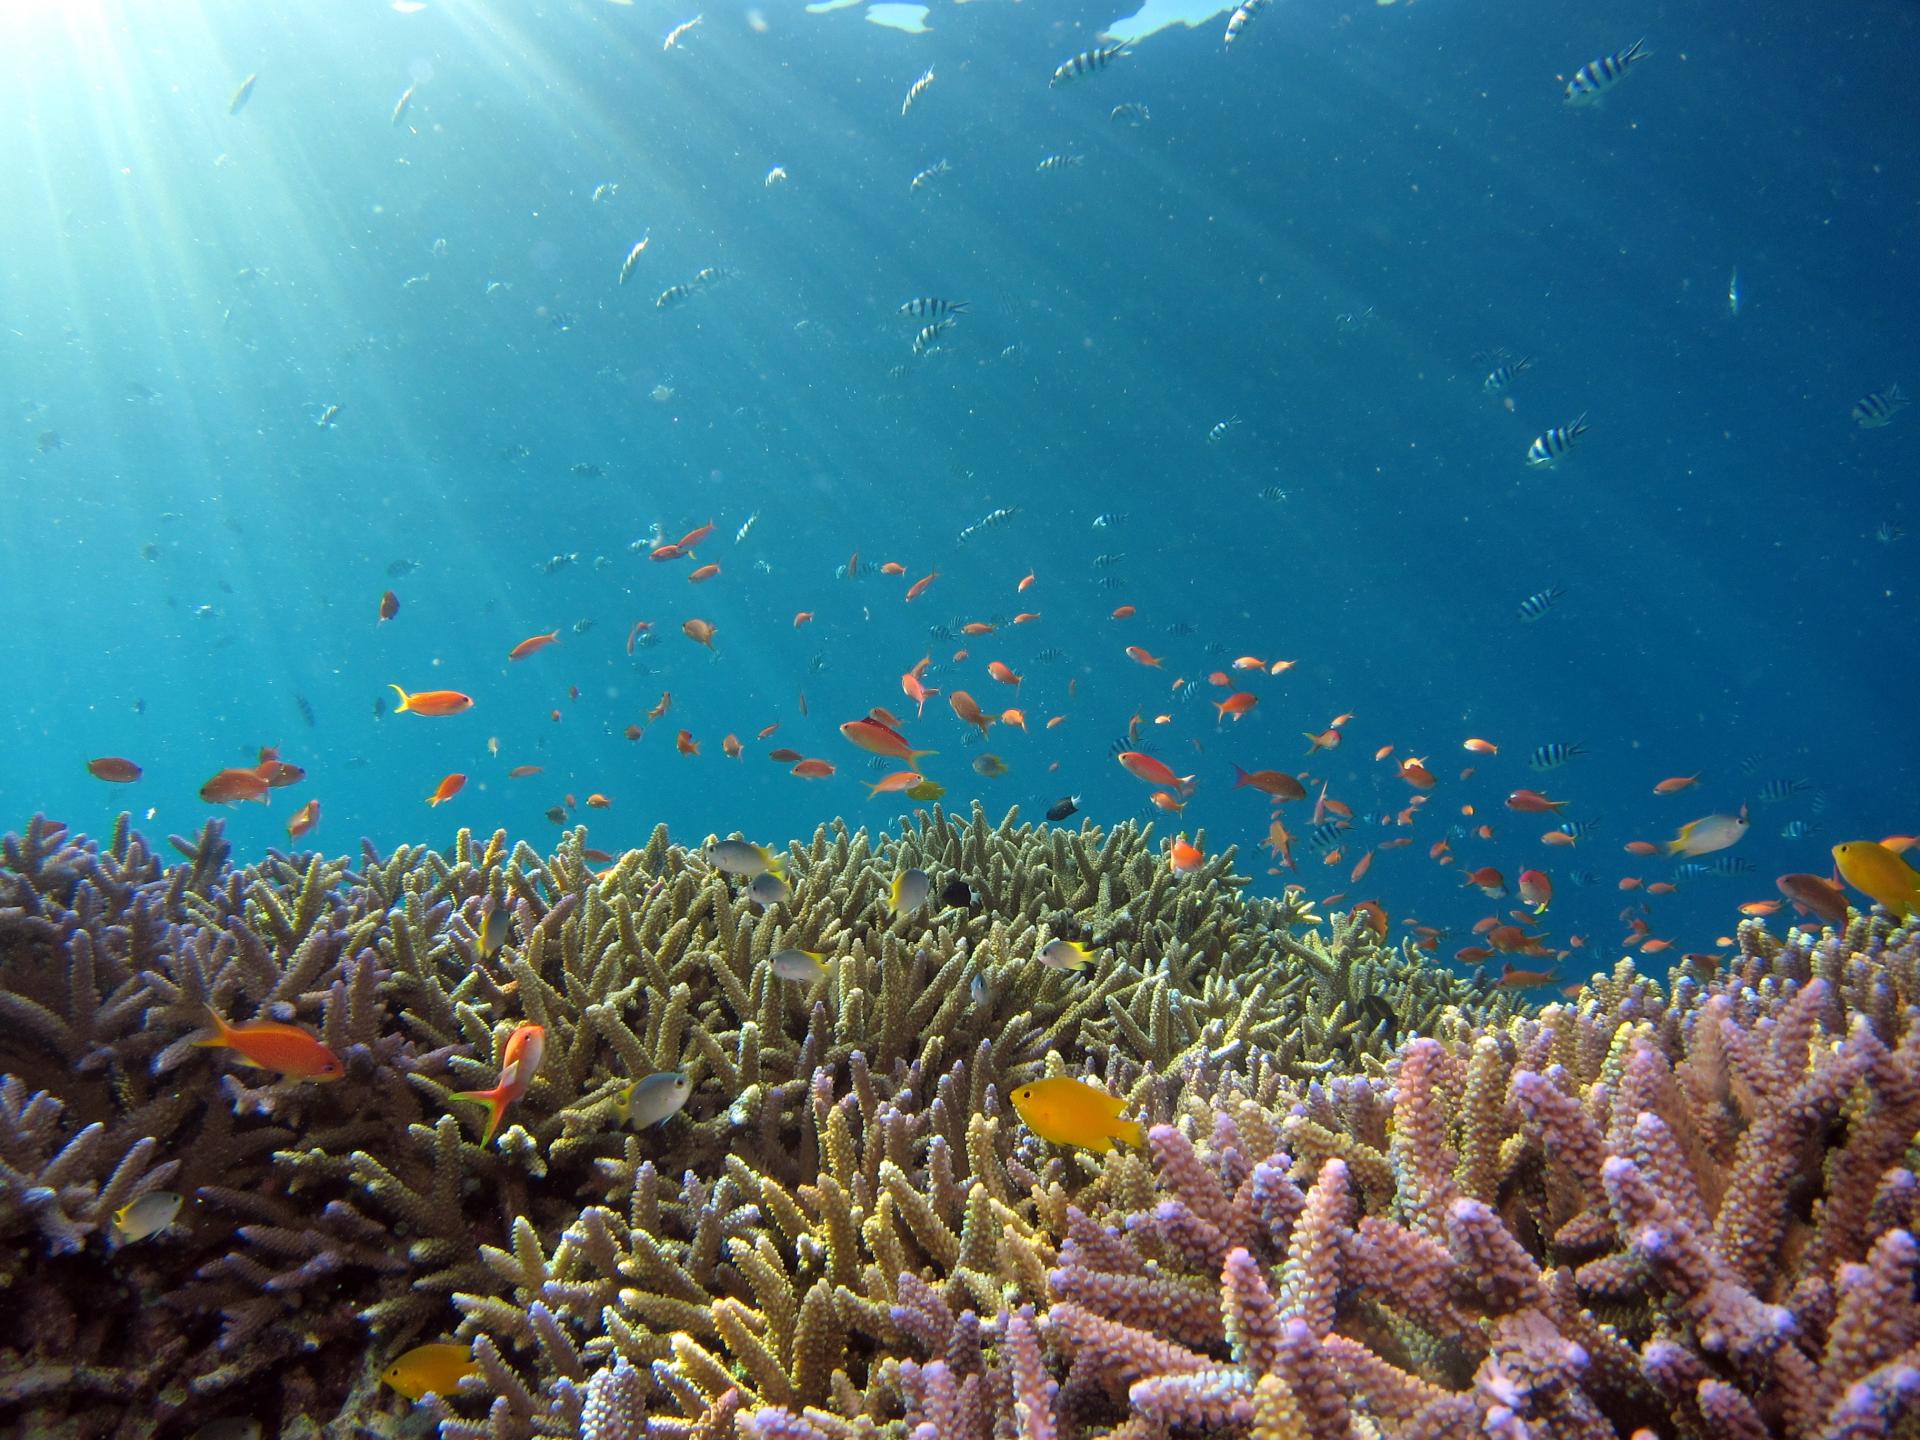 Climate action for schools of fish feeding from coral reefs